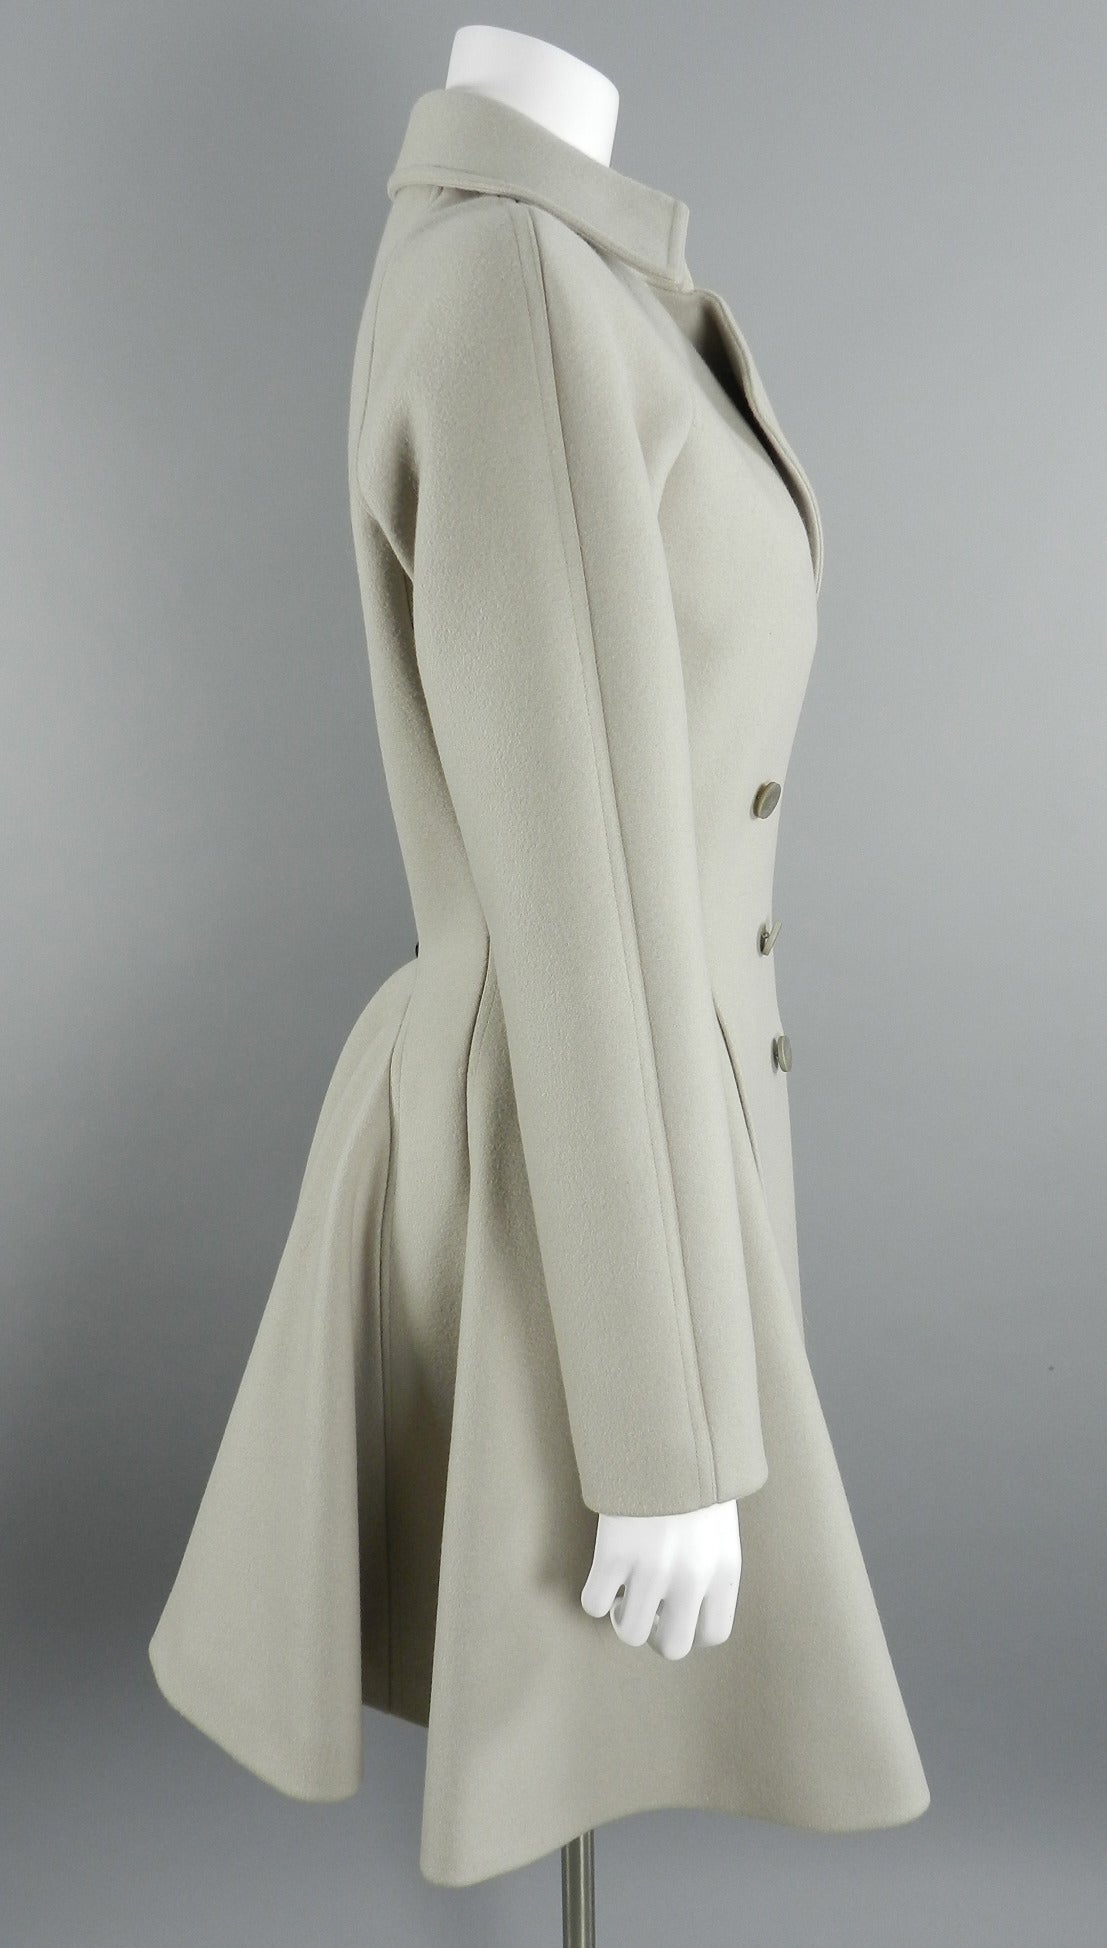 Alaia light dove grey structured wool dress coat. Tagged size FR 42 but since Alaia runs very small, this corresponds to a USA 6. Garment bust measures 38